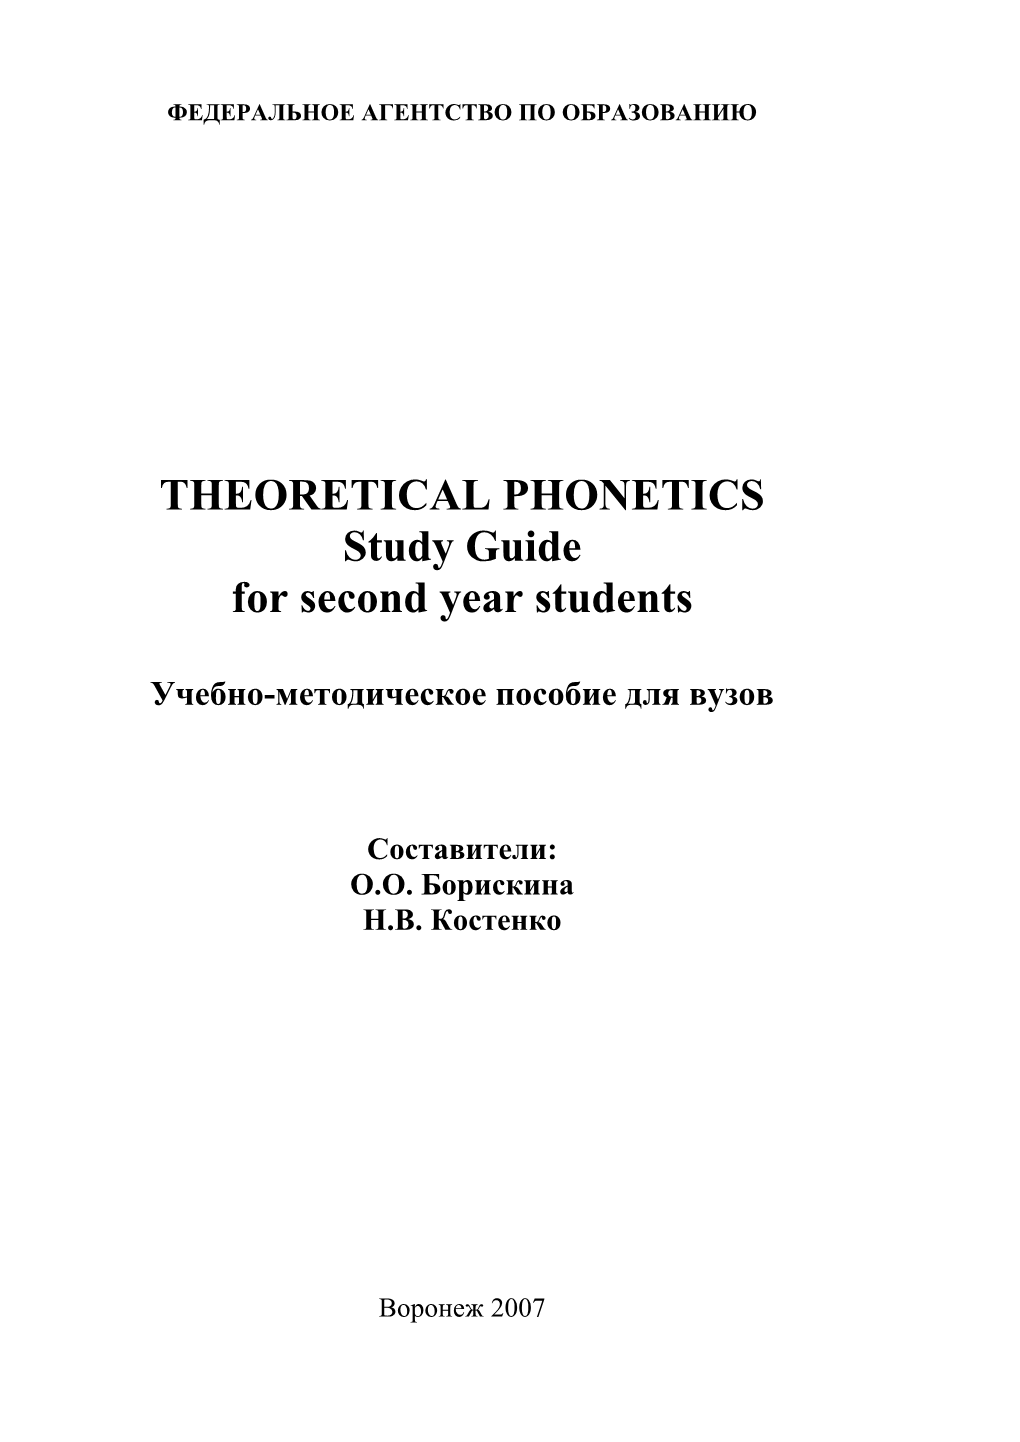 THEORETICAL PHONETICS Study Guide for Second Year Students